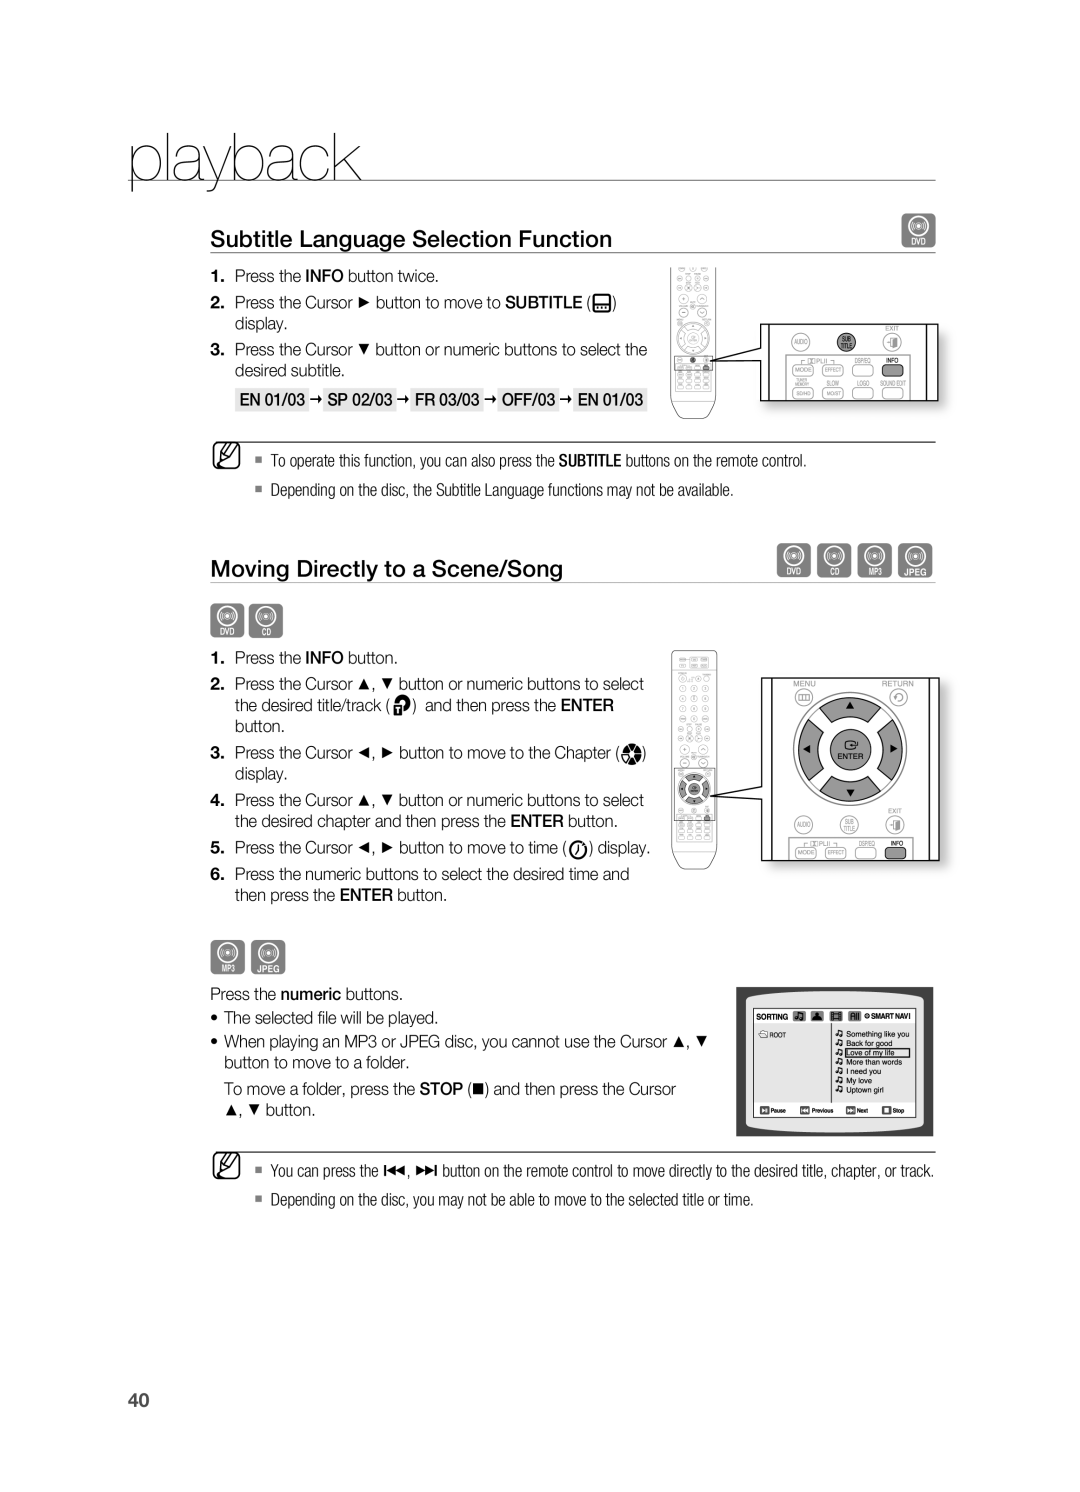 Samsung HT-TX715 user manual playback, Subtitle Language Selection Function, Moving Directly to a Scene/Song 